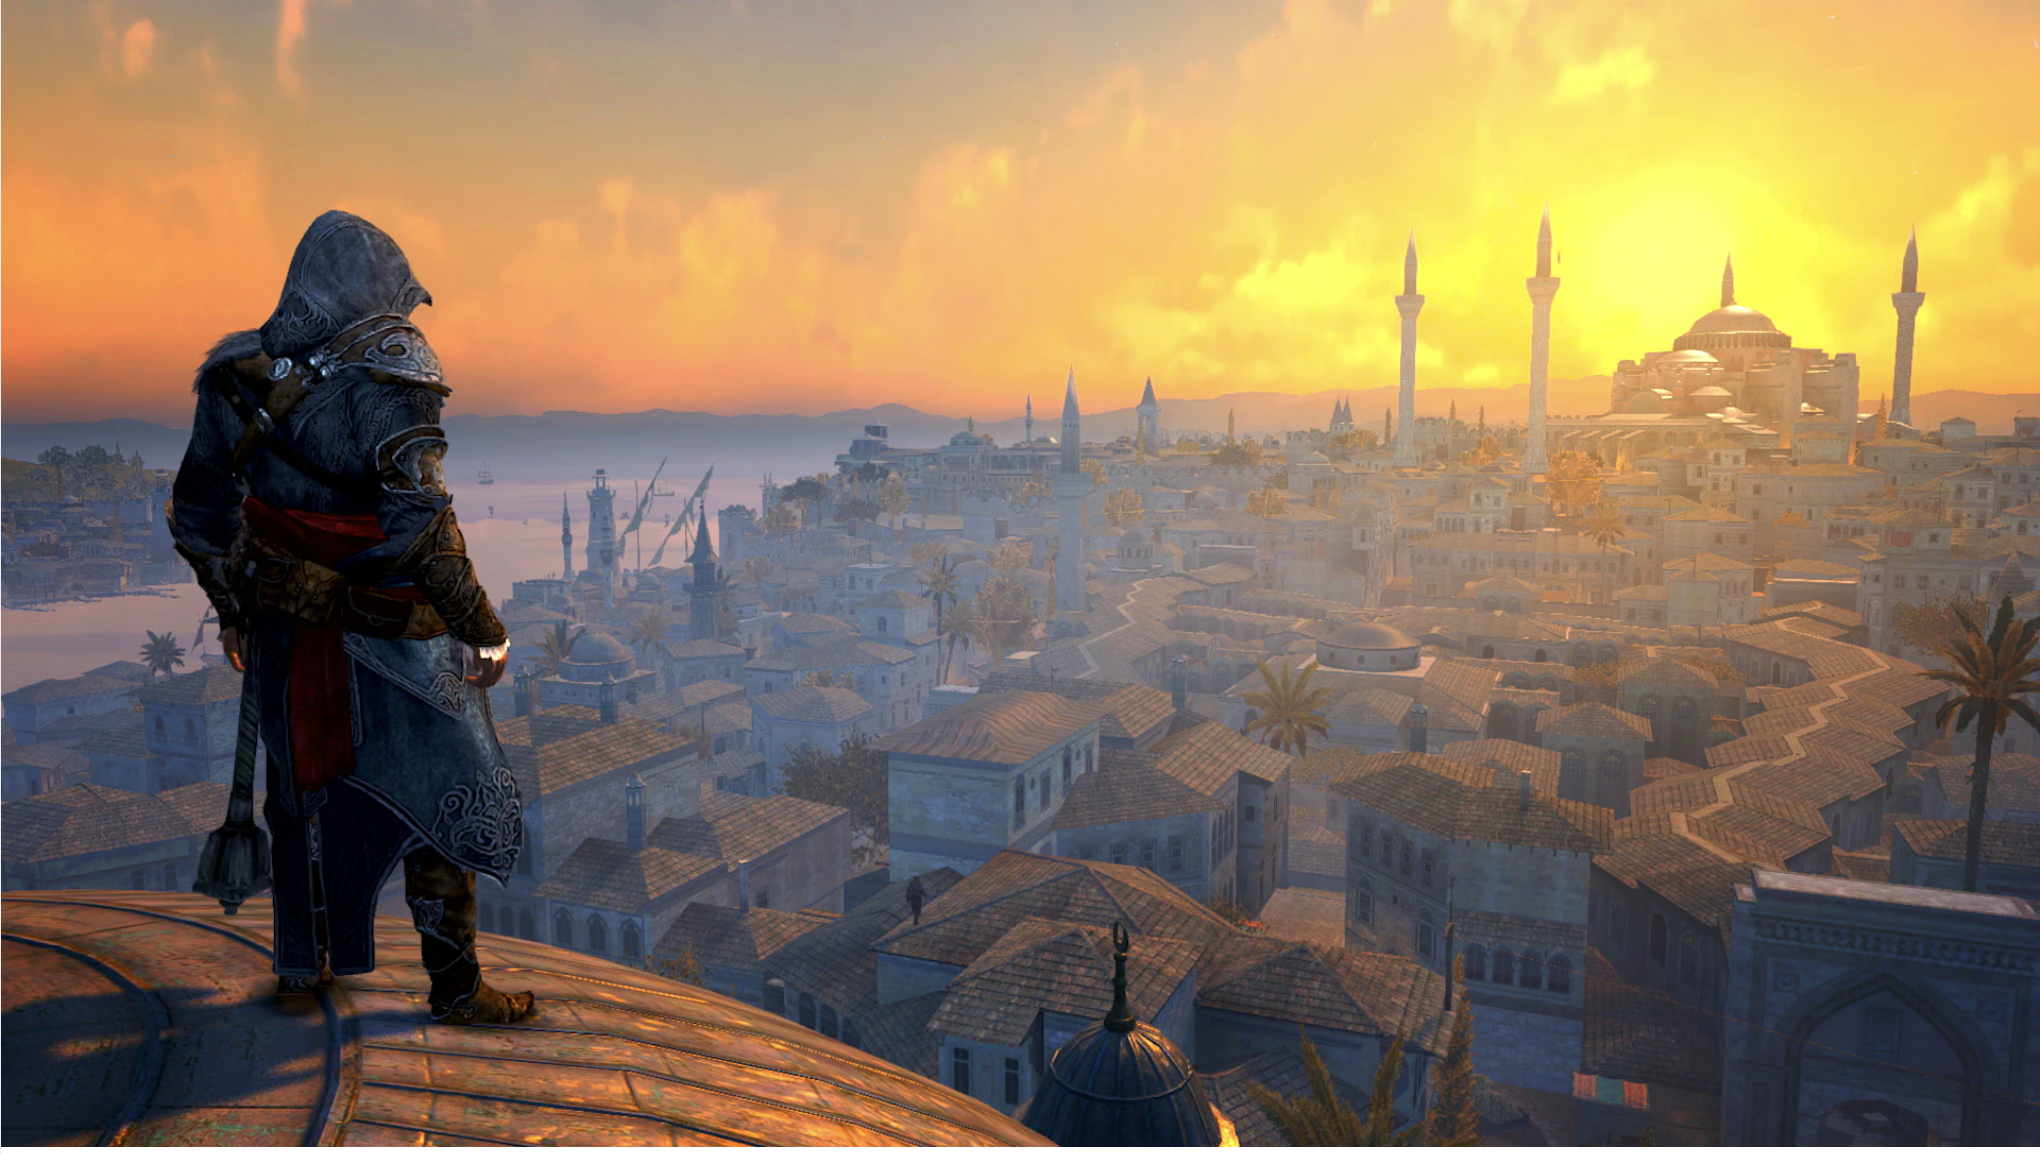 Review: Ezio's not the only thing getting old in Assassin's Creed